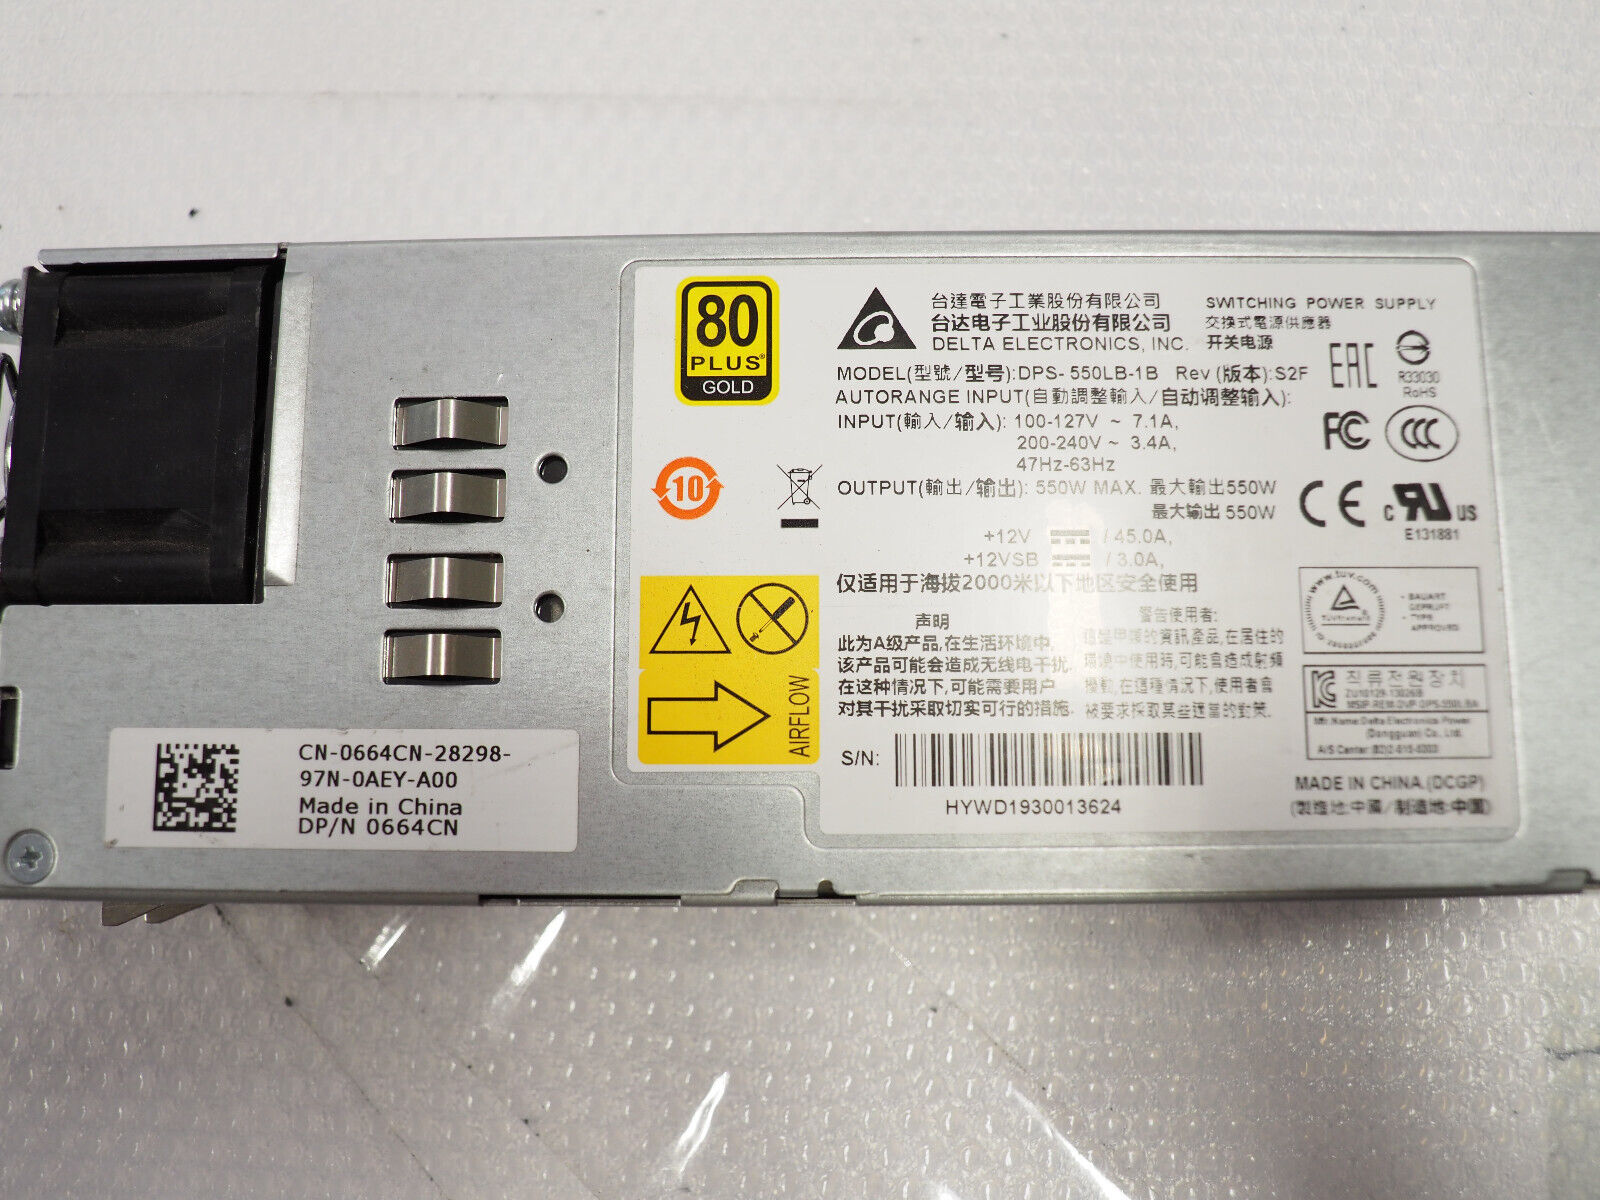 DELL DELTA DPS-550LB-1B 550W 80 Gold Switching Power Supply Module DP/N: 664CN